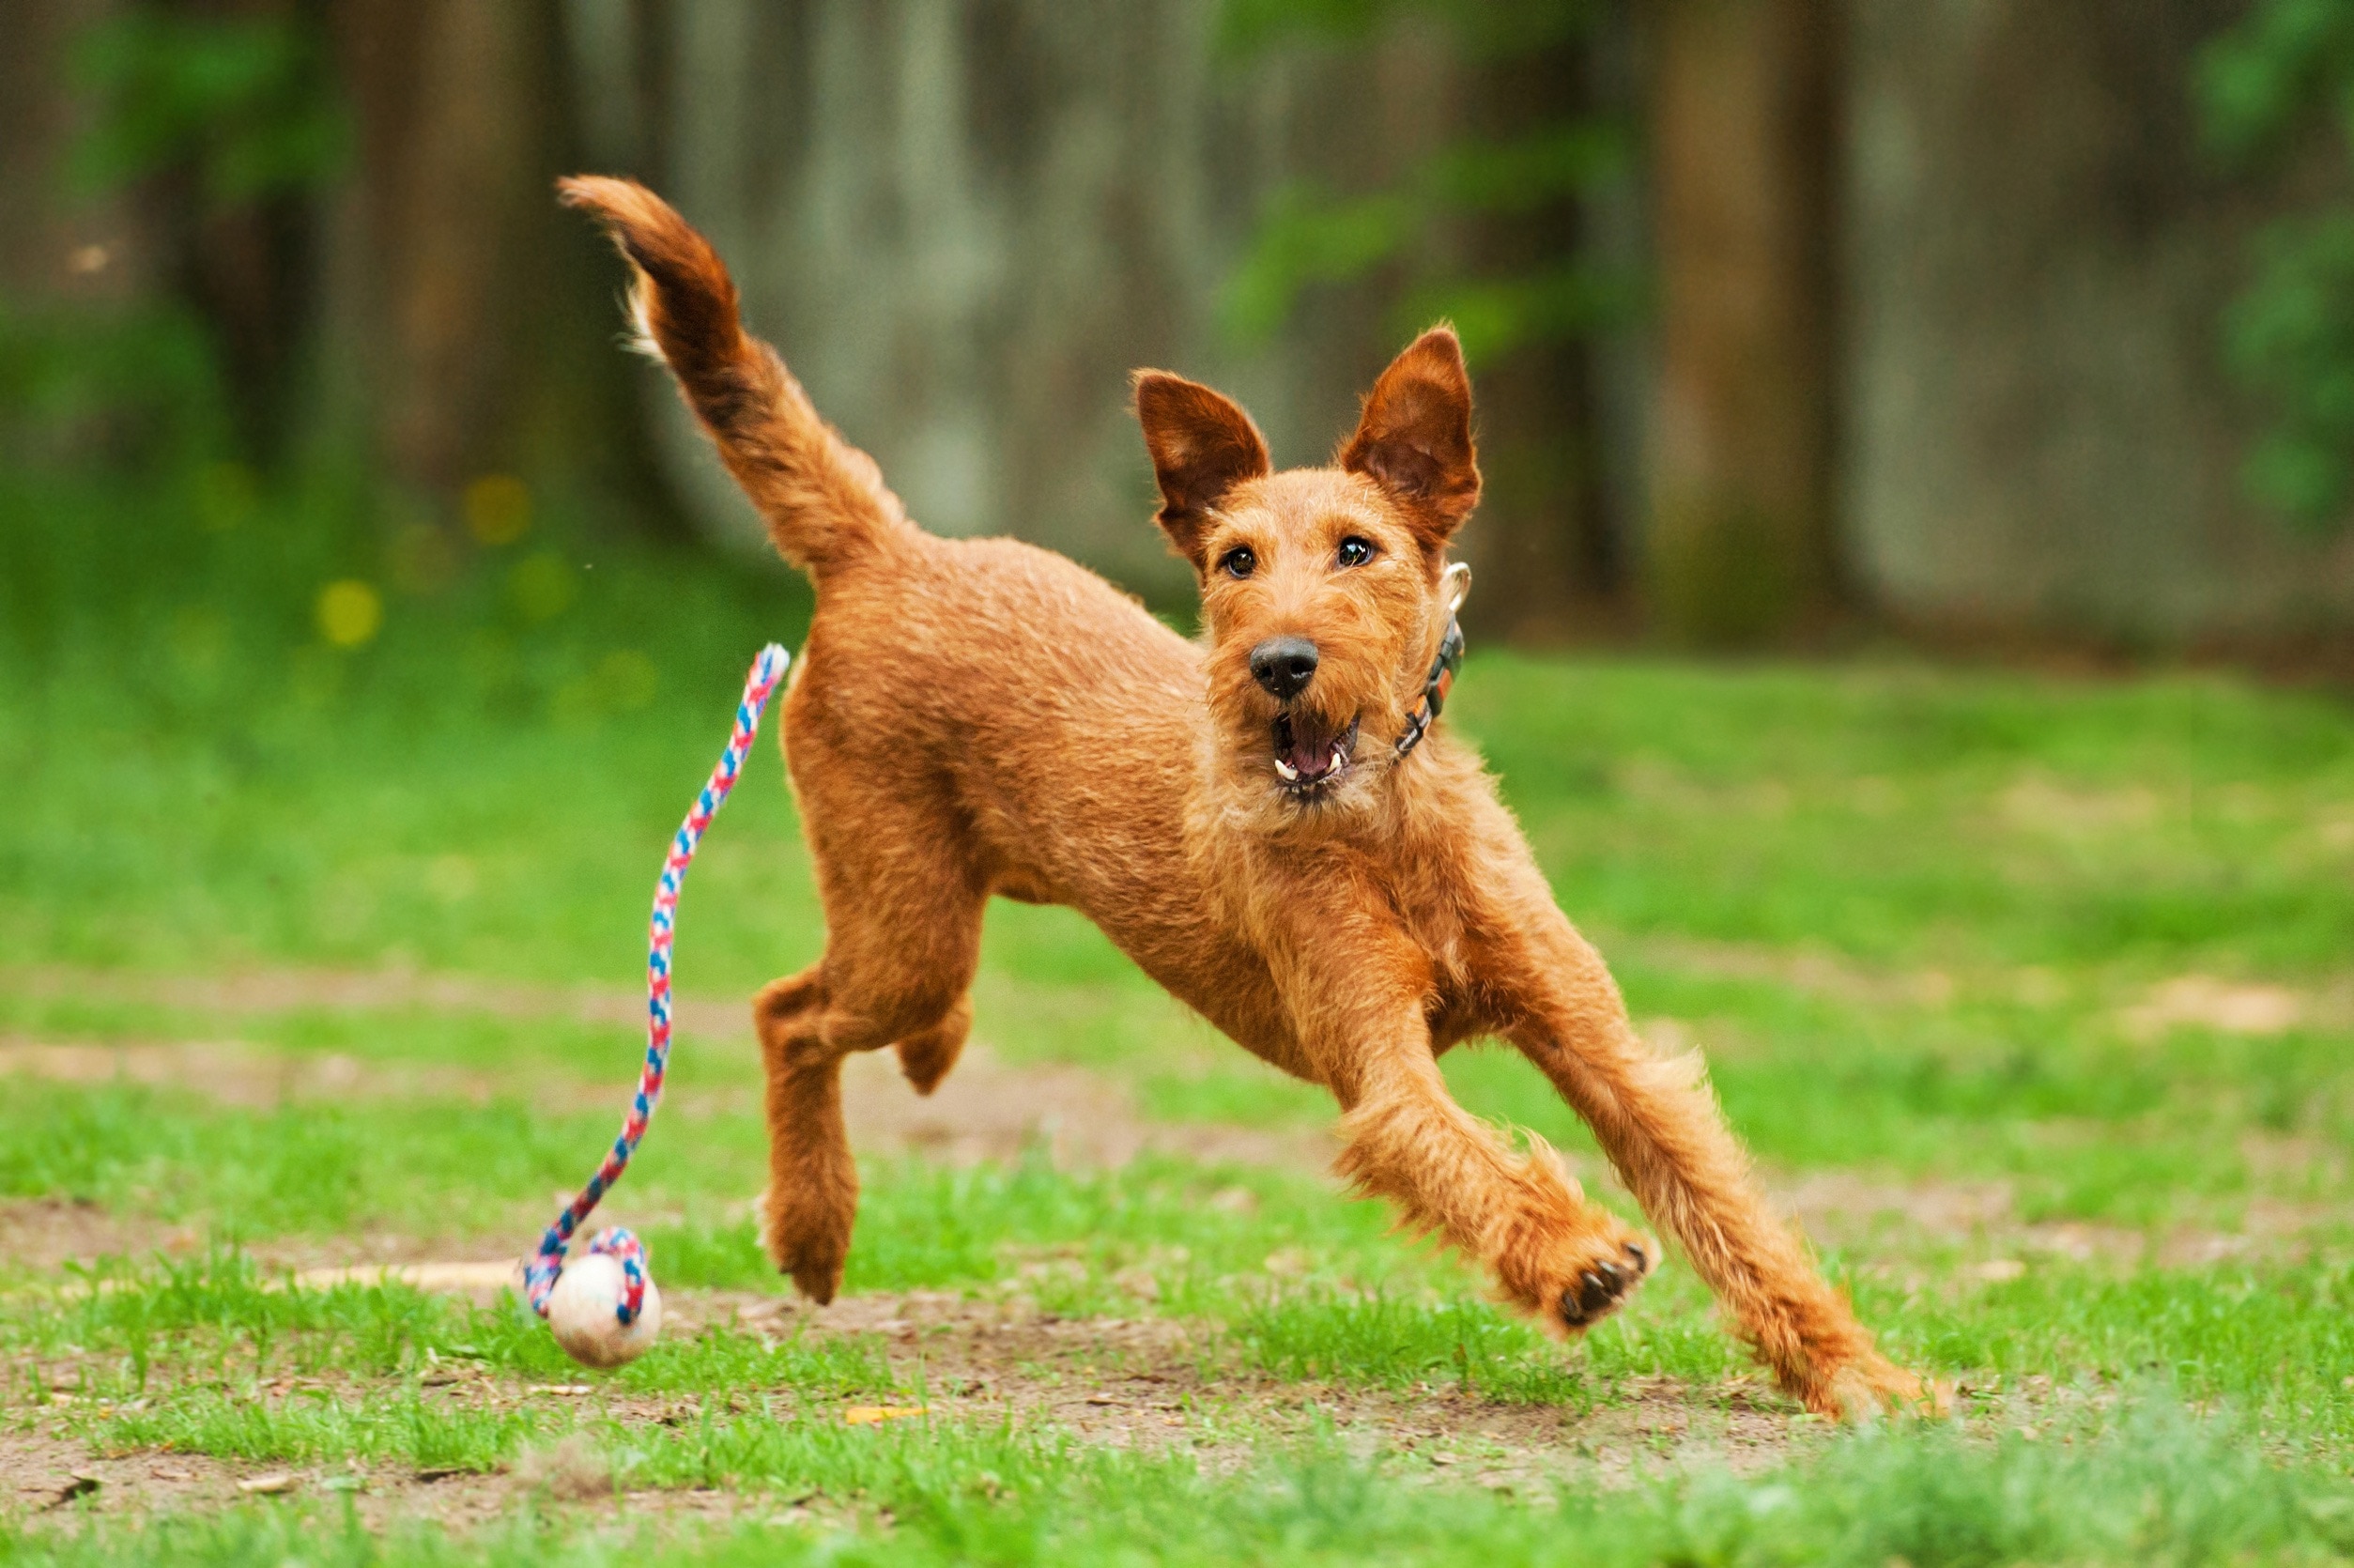 irish terrier chasing a toy